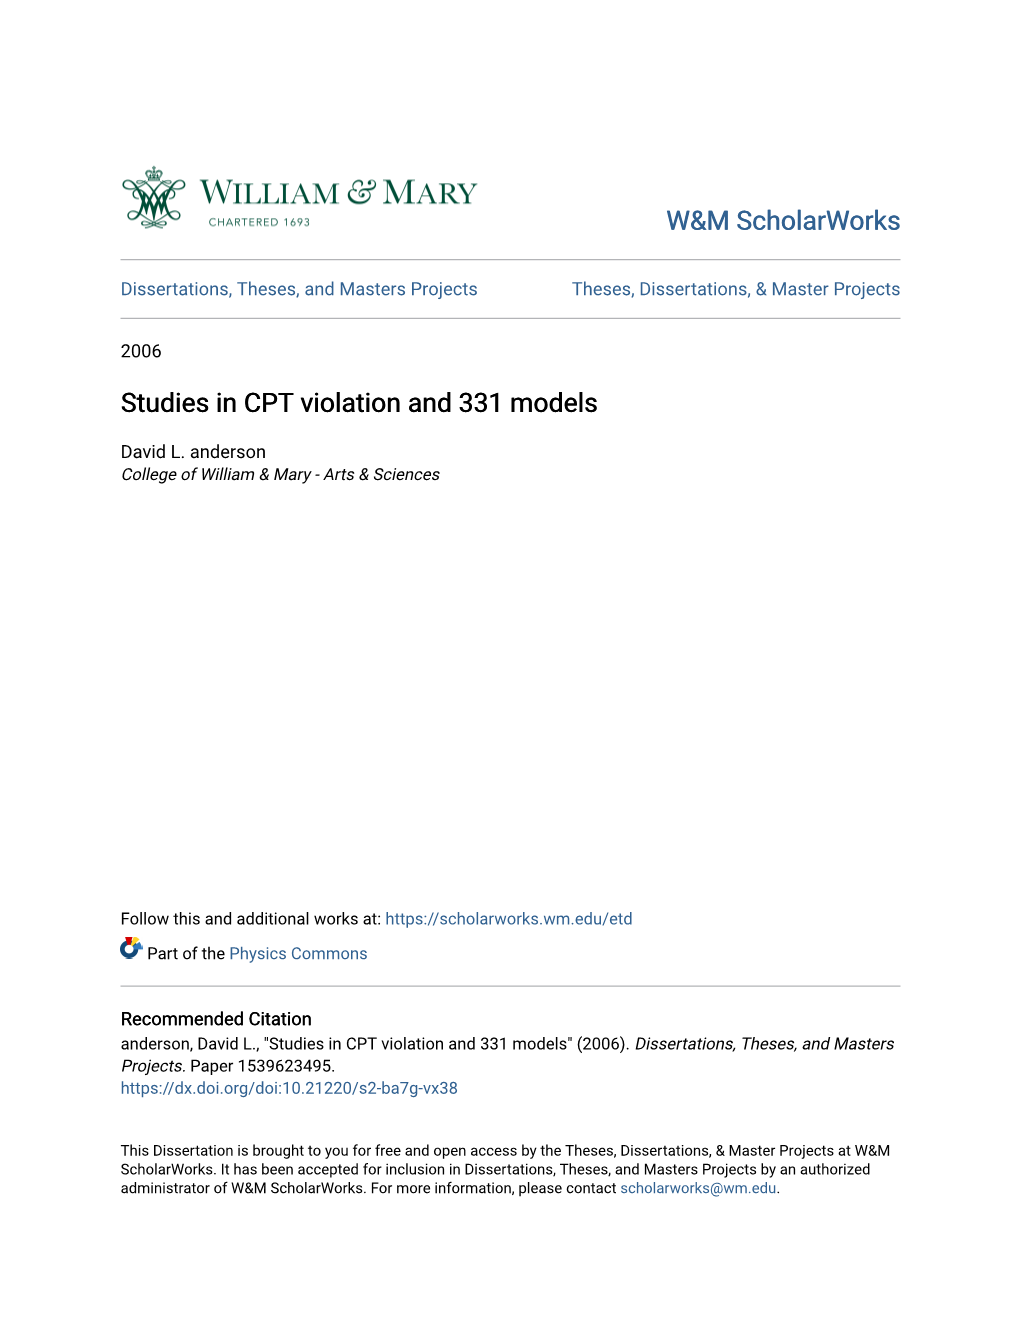 Studies in CPT Violation and 331 Models